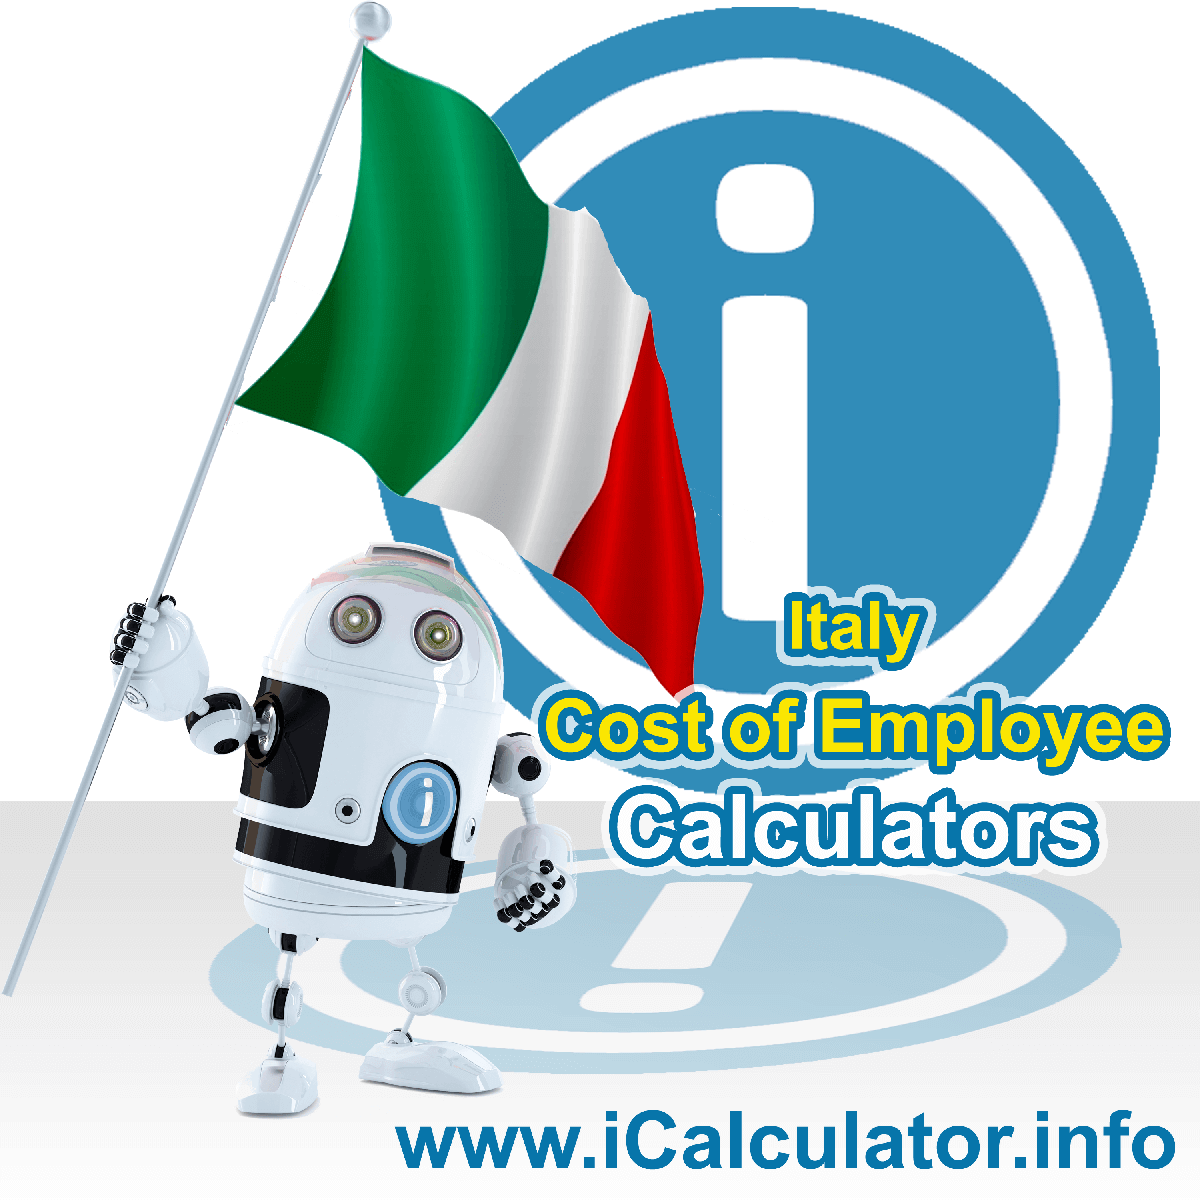 True Cost of an Employee in Italy Calculator. This image shows a new employer in Italy looking hiring a new employee, they calculate the cost of hiring an employee in Italy using the True Cost of an Employee in Italy calculator to understand their employment cost in Italy in 2020